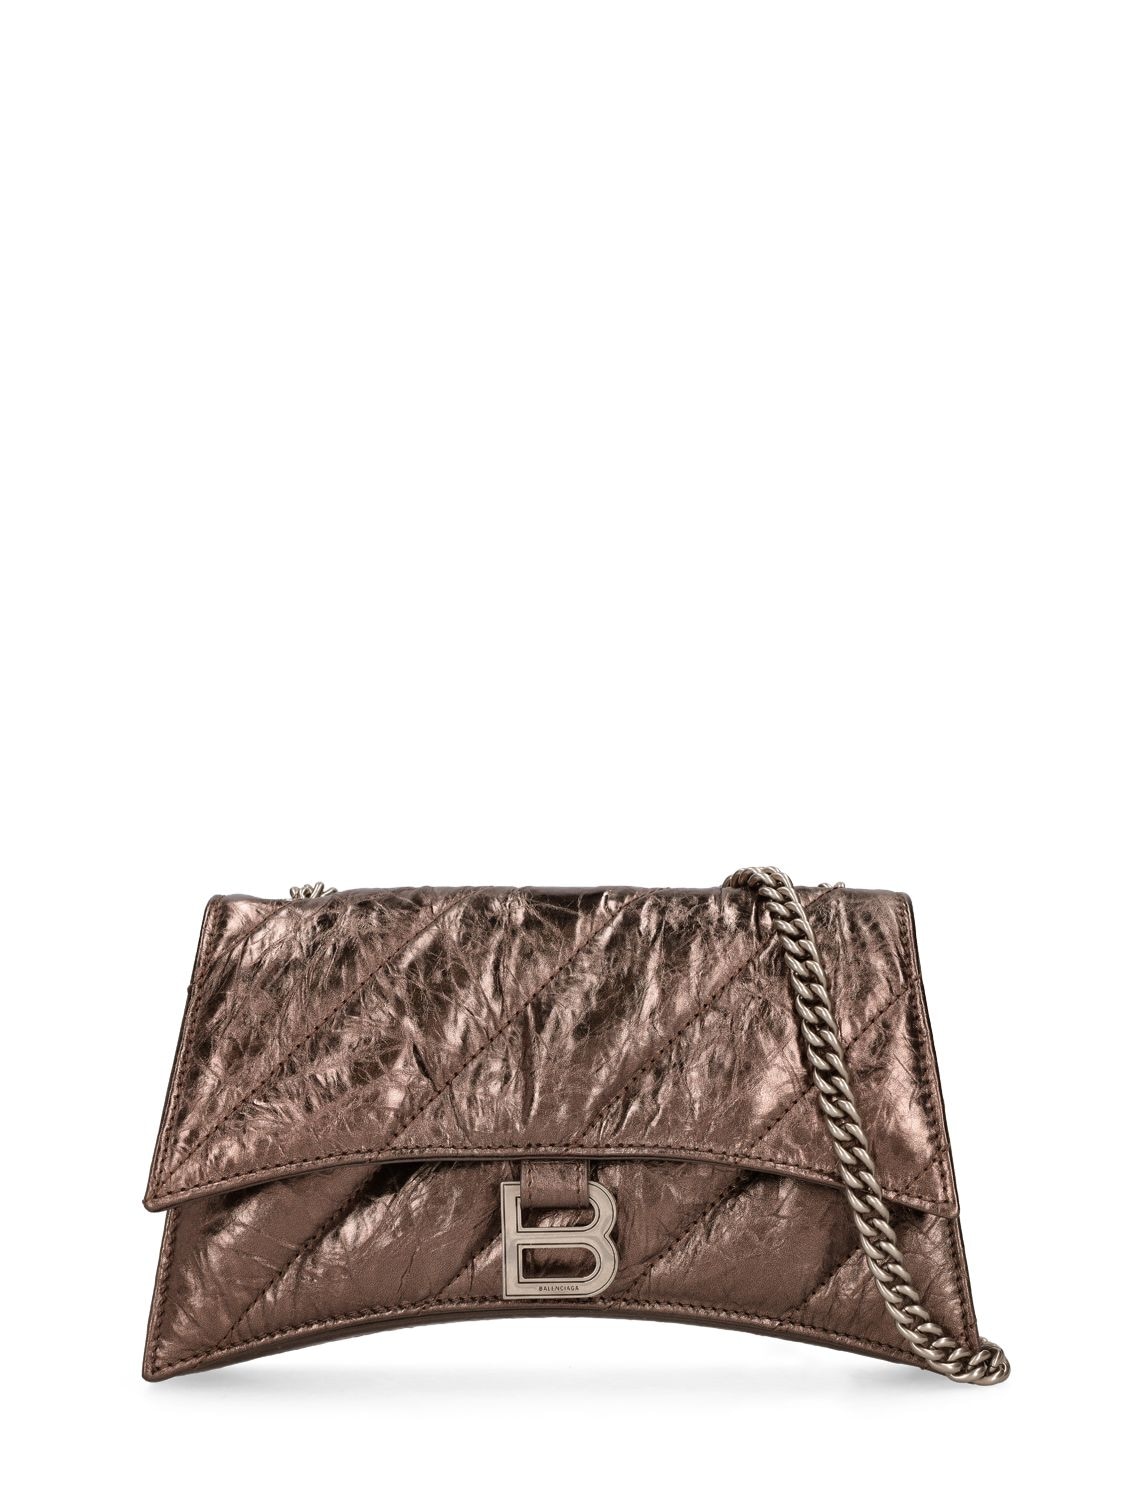 S Crush Quilted Leather Shoulder Bag – WOMEN > BAGS > SHOULDER BAGS